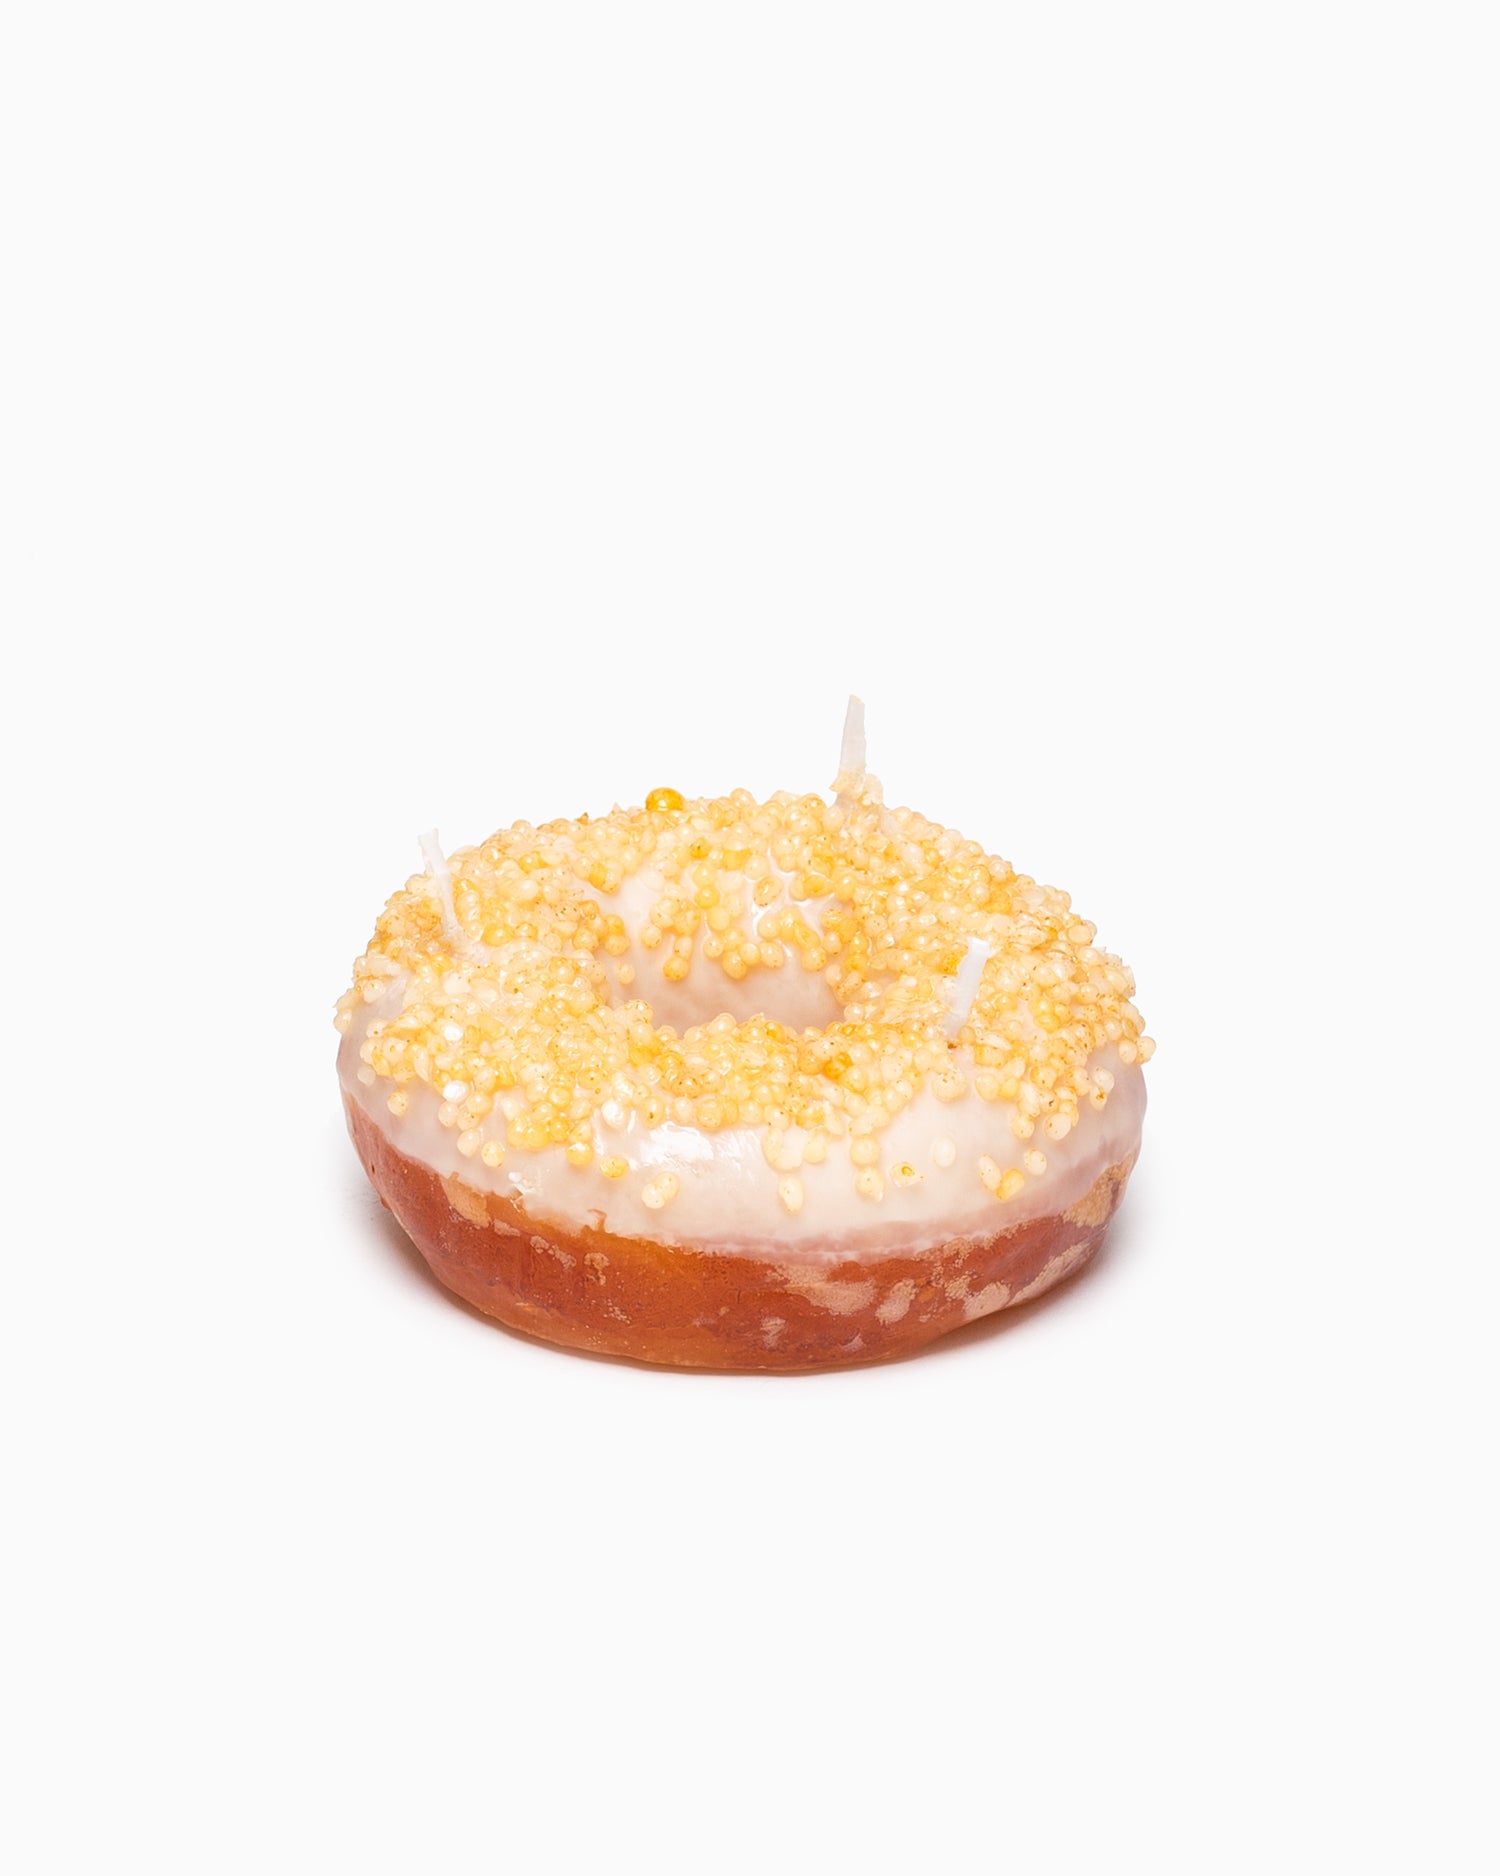 Donut Candle - Vanilla Glazed with Yellow Sprinkles